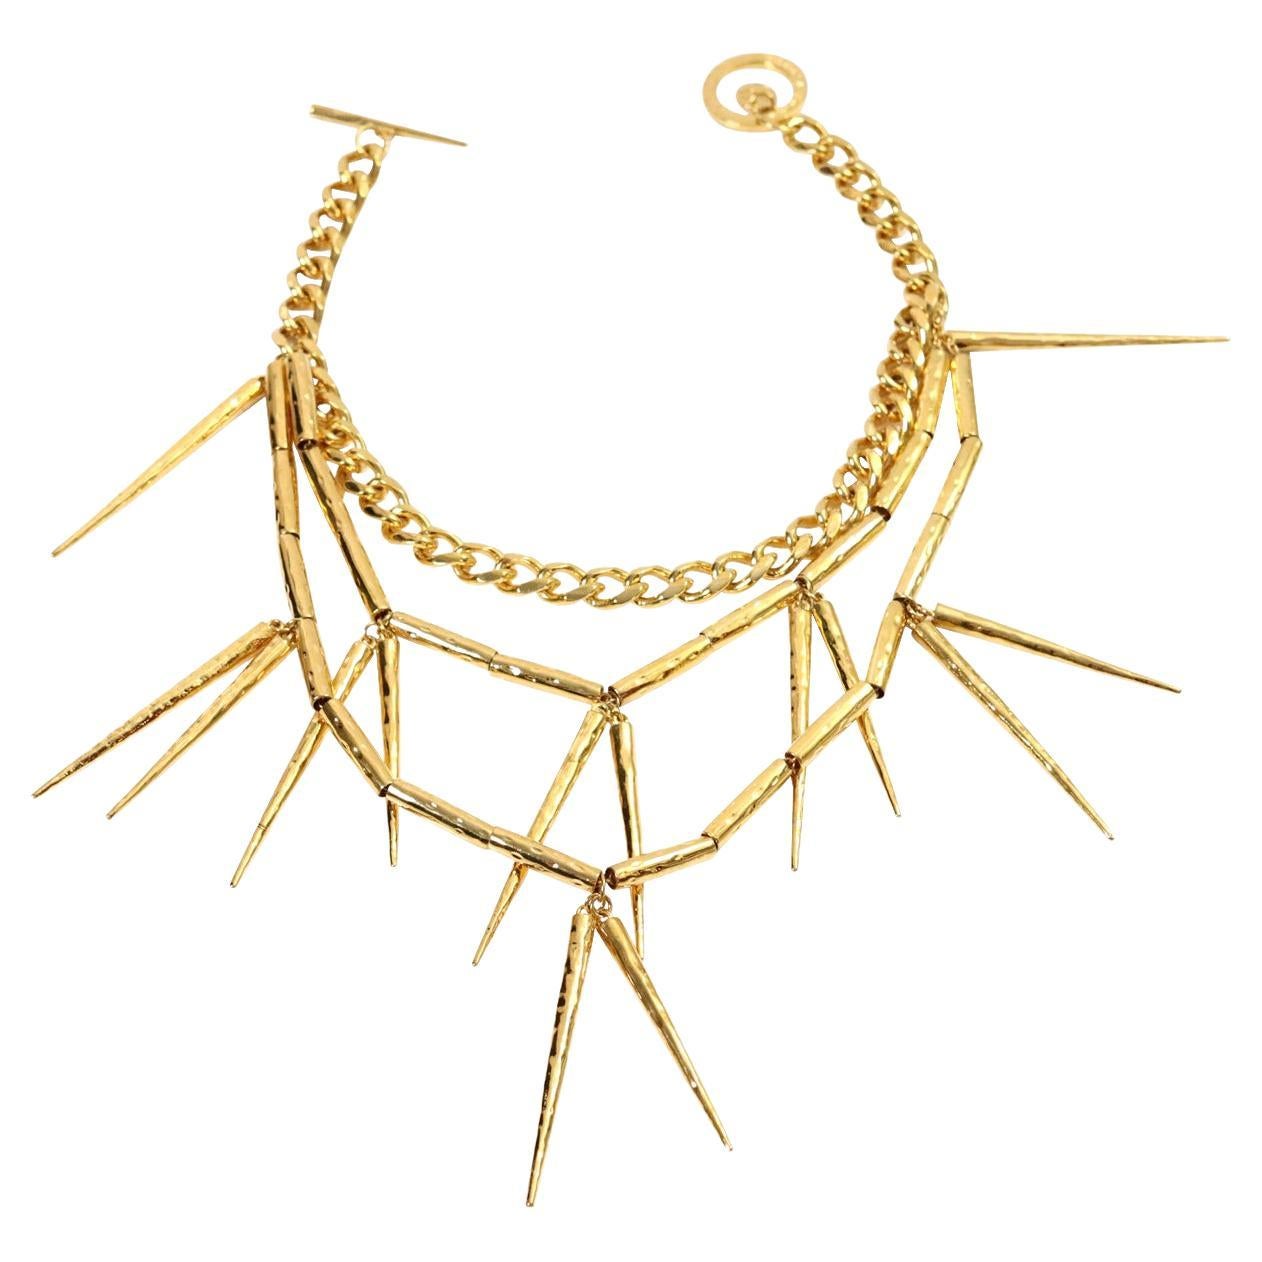 The Collective Monika Chiang Gold Spike Necklace Circa 2011